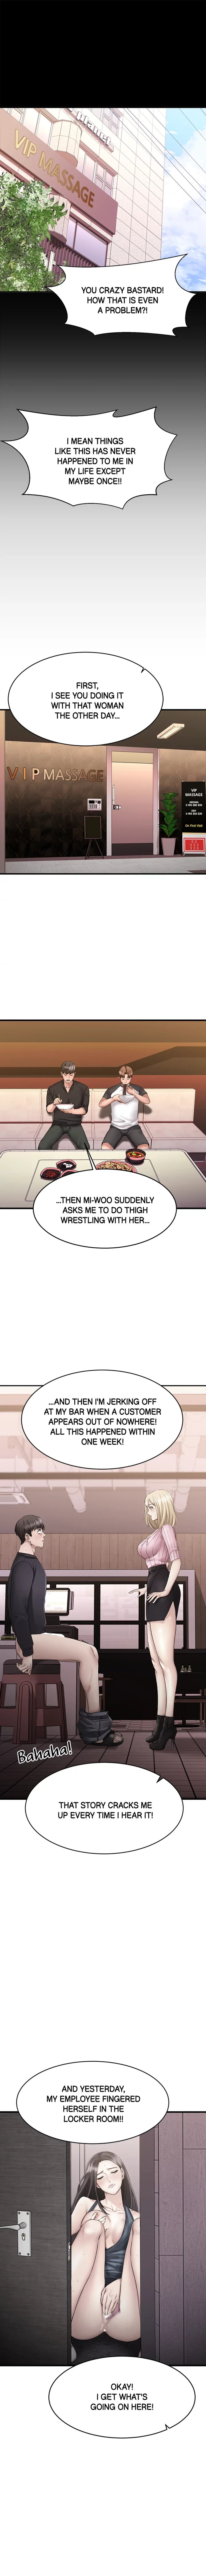 My Female Friend Who Crossed The Line - Chapter 10 Page 6